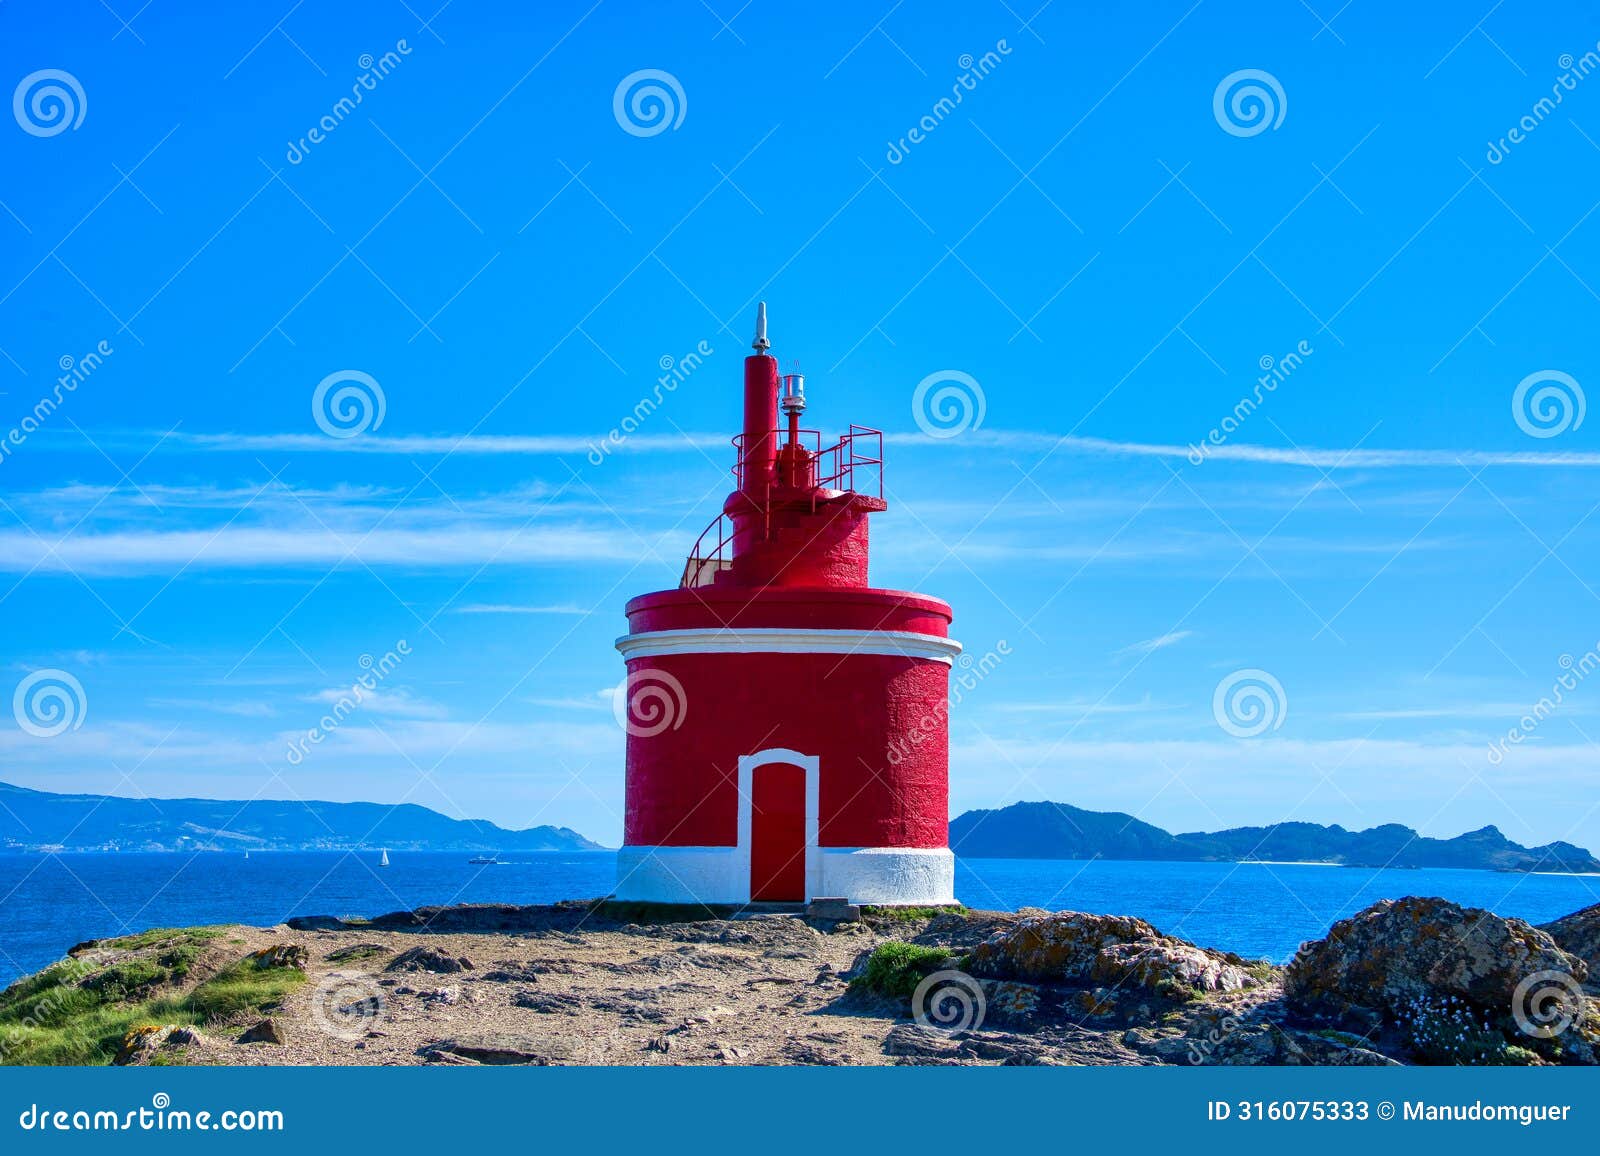 lighthouse in landscape. the iconic red lighthouse at punta robaleira. cabo home, cangas, galicia, spain